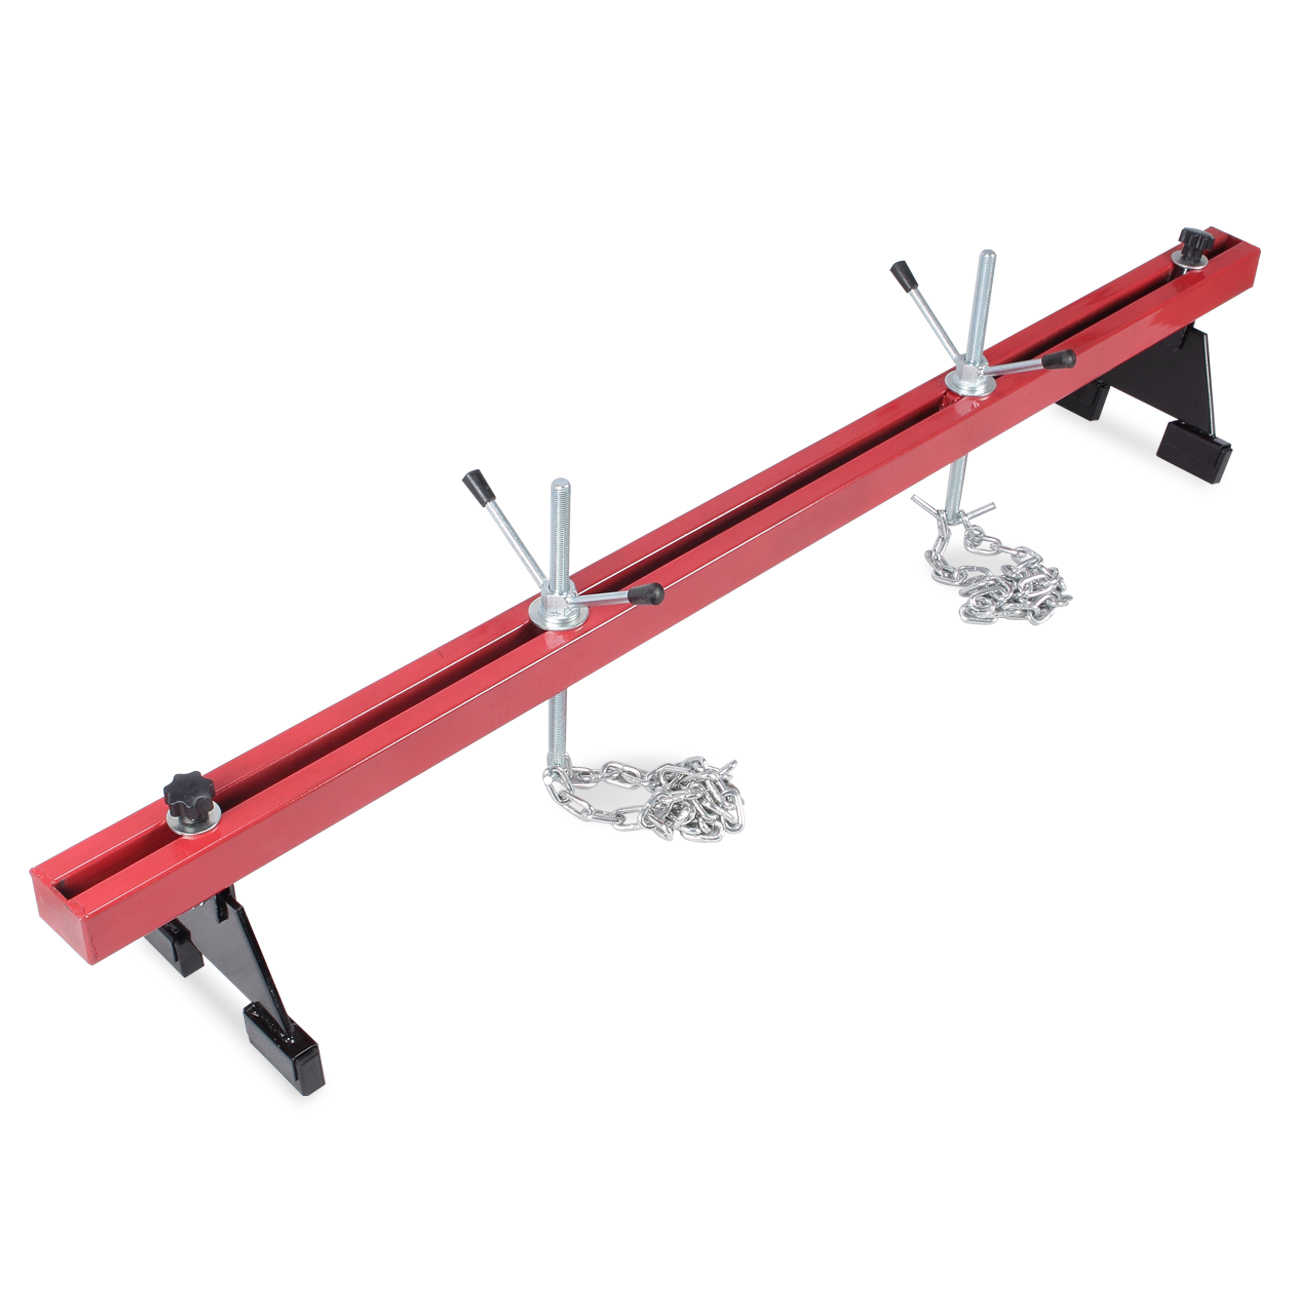 Arksen 1100lbs Capacity Engine Load Leveler Adjustable Support Bar for Transmission Repair w/ Dual Hook, Red